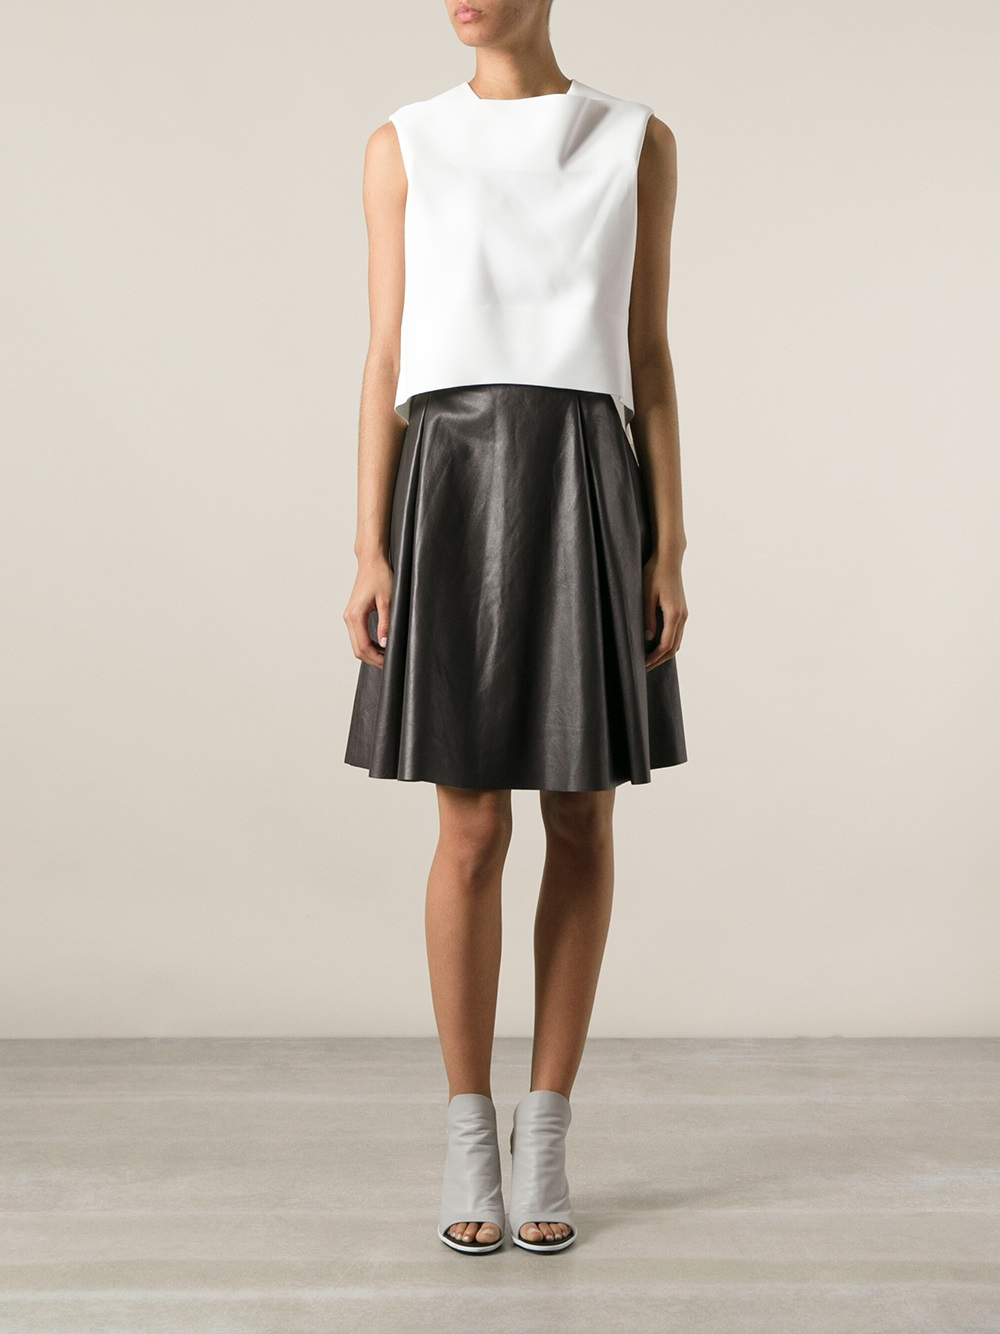 Lyst - Balenciaga Structured Sleeveless Blouse in White